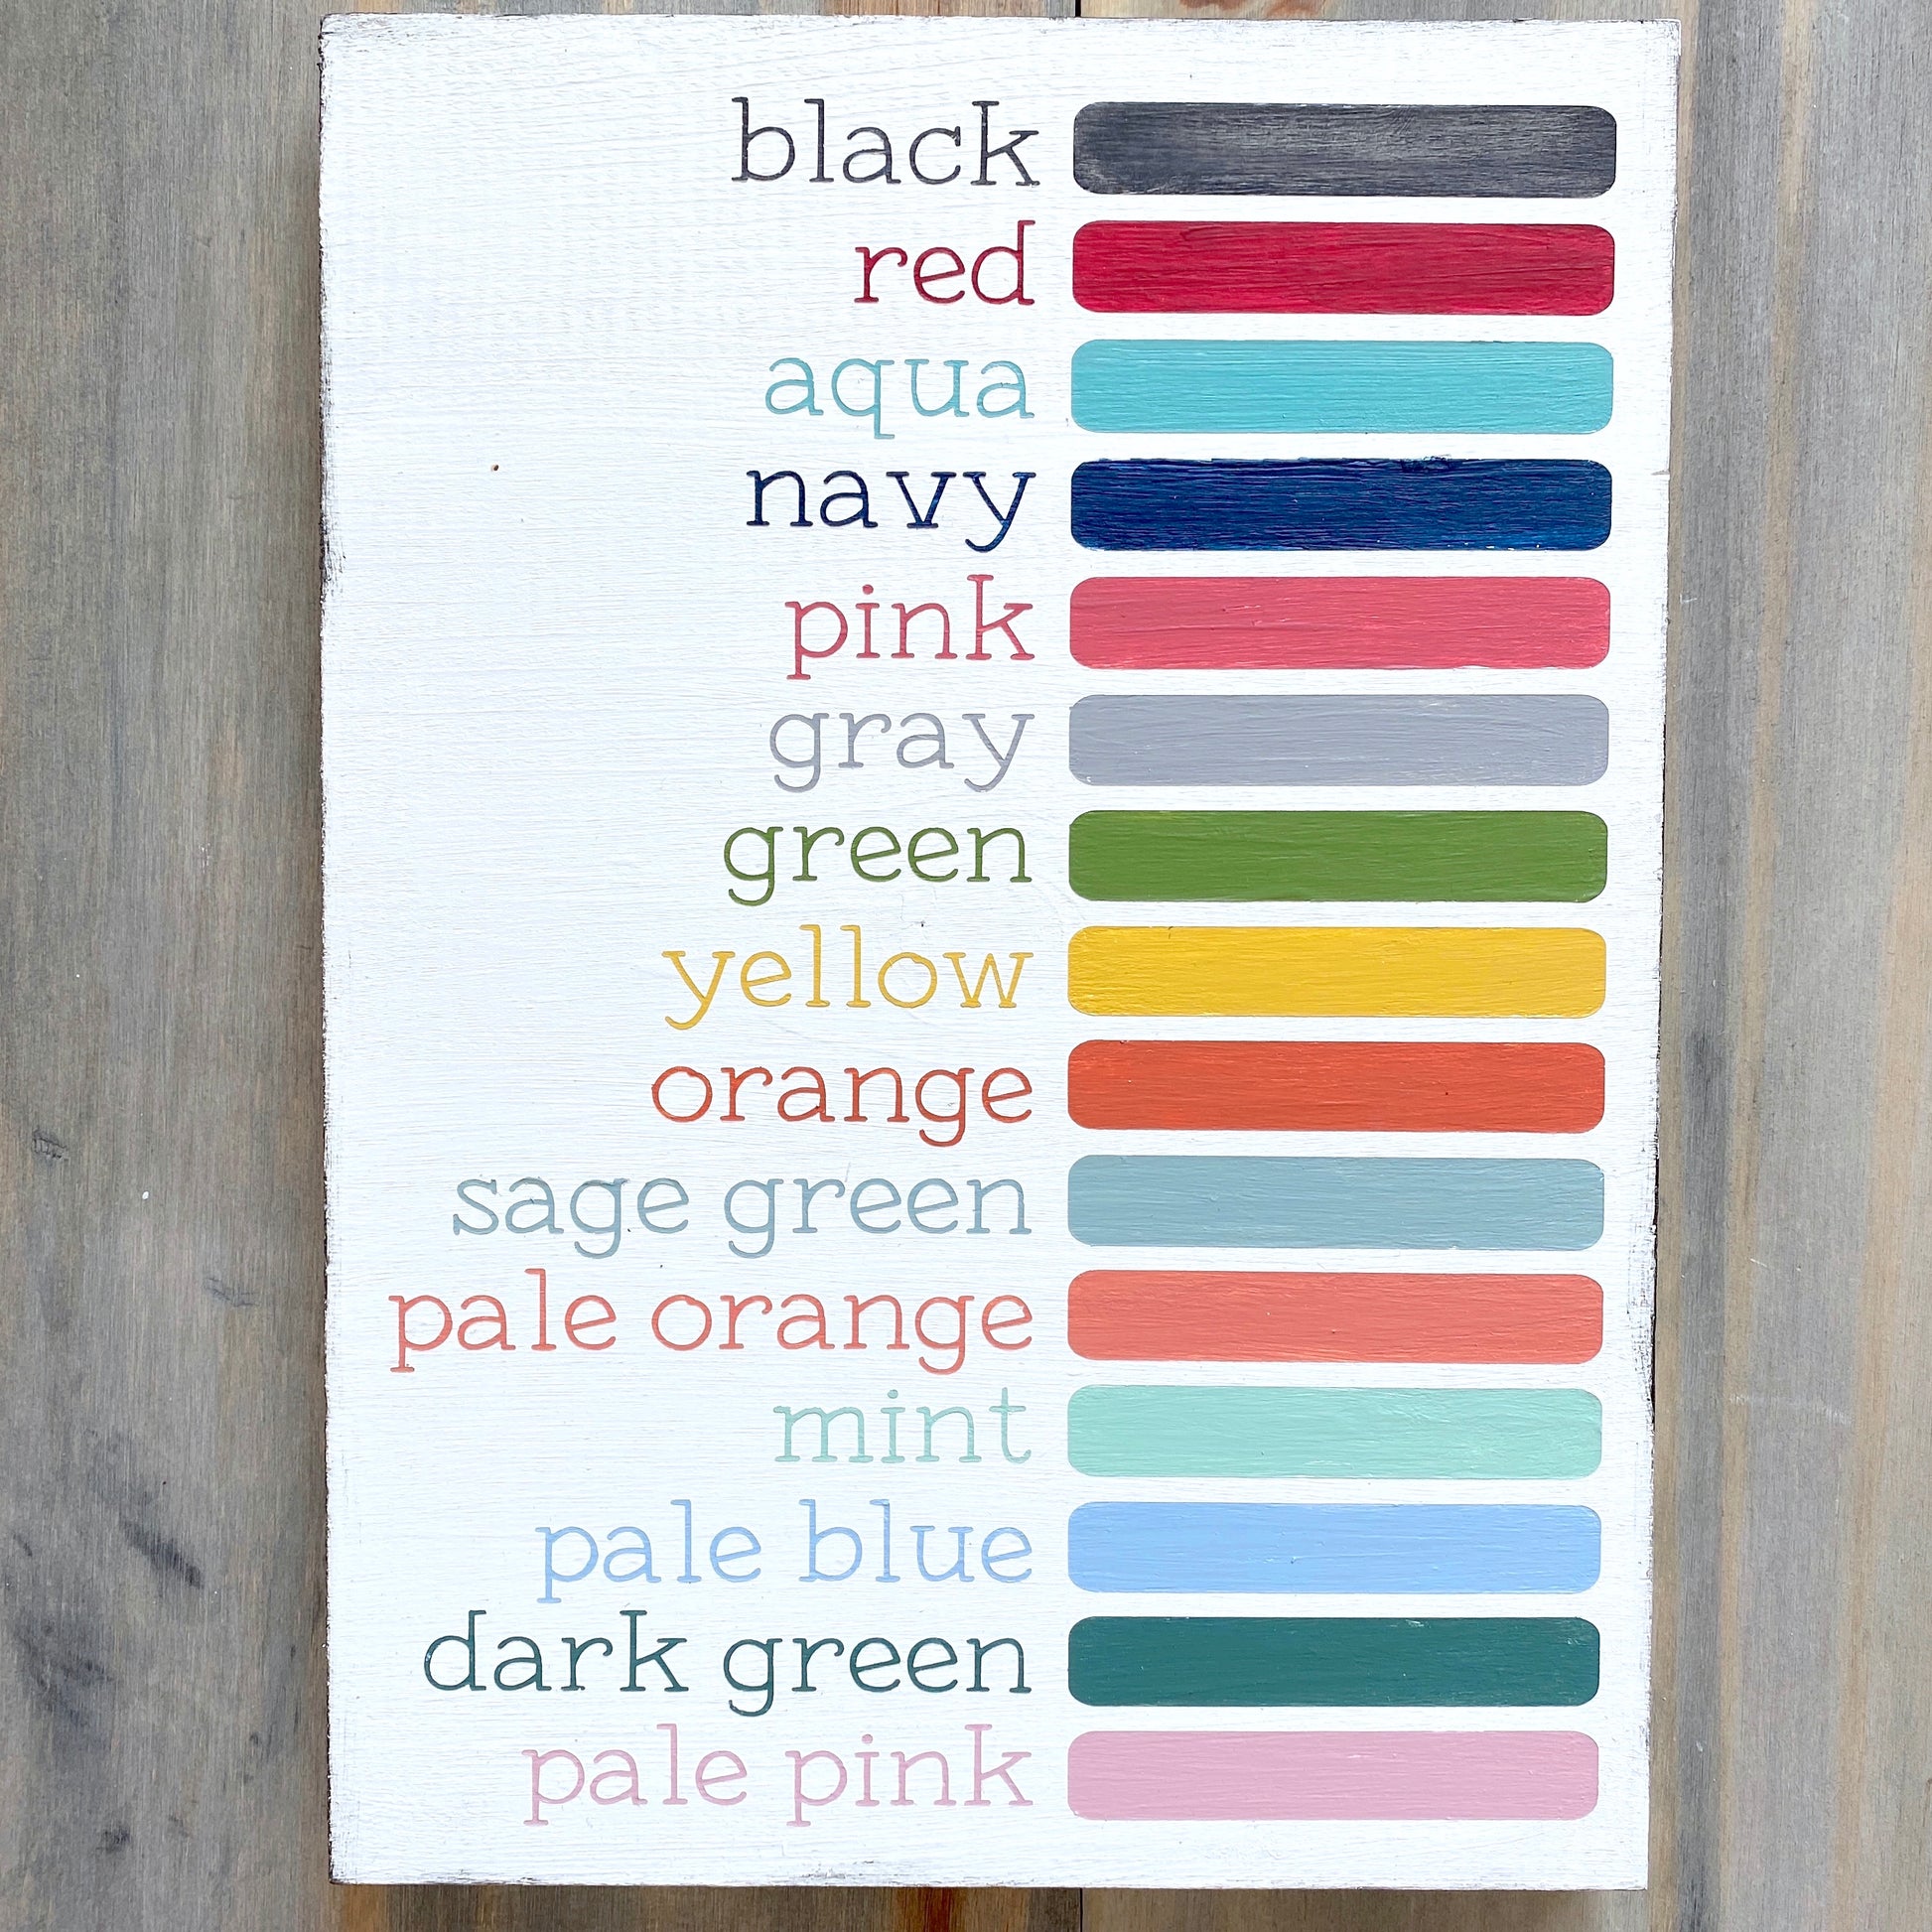 Anchored Soul color Display Photo with wood sign showing all available colors painted in words and color block - black, red, aqua, navy, pink, gray, green, yellow, orange, sage green, pale orange, mint, pale blue, dark green, pale pink